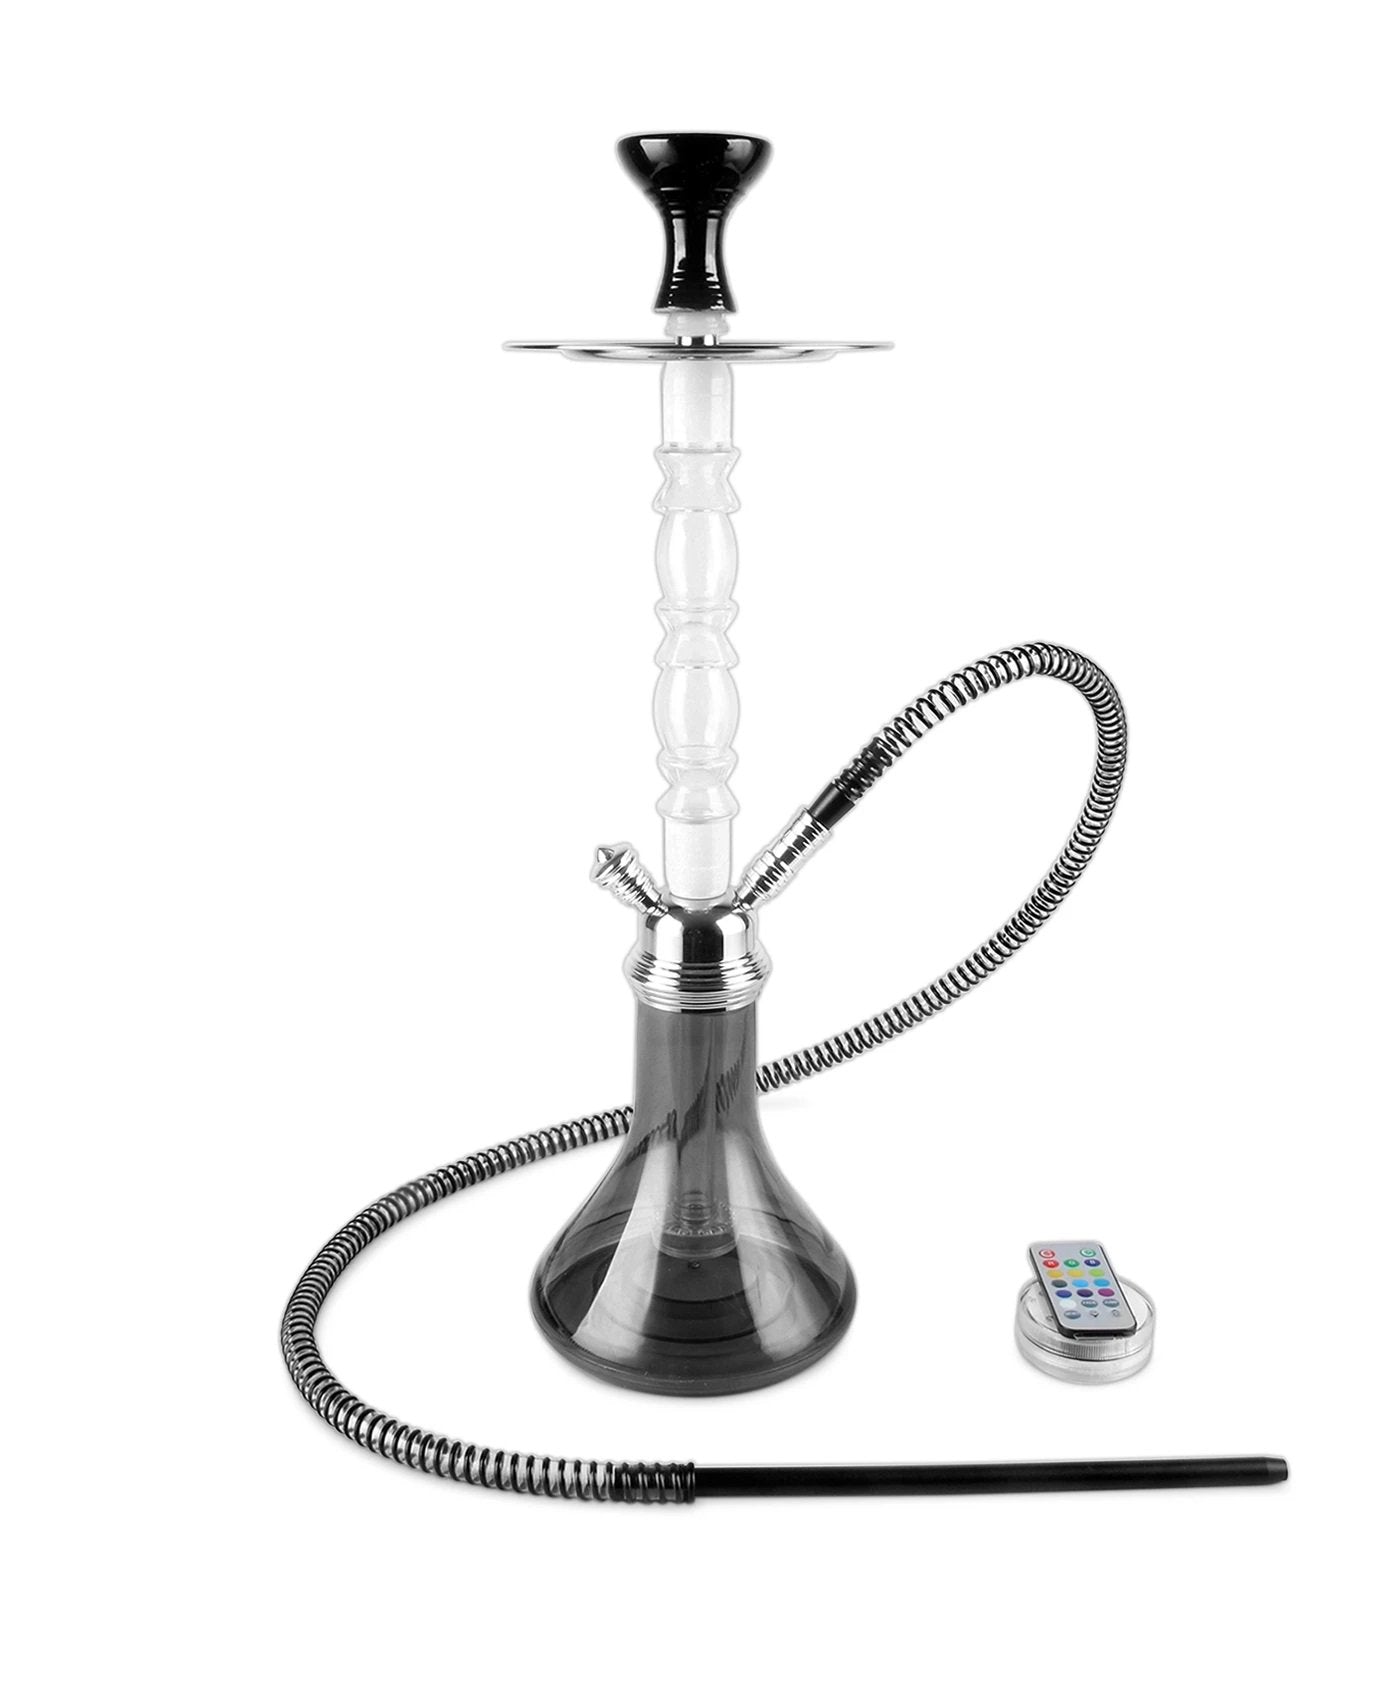 Rip Acdrylic Hookah 24" Clear Stem with black base and led light controler